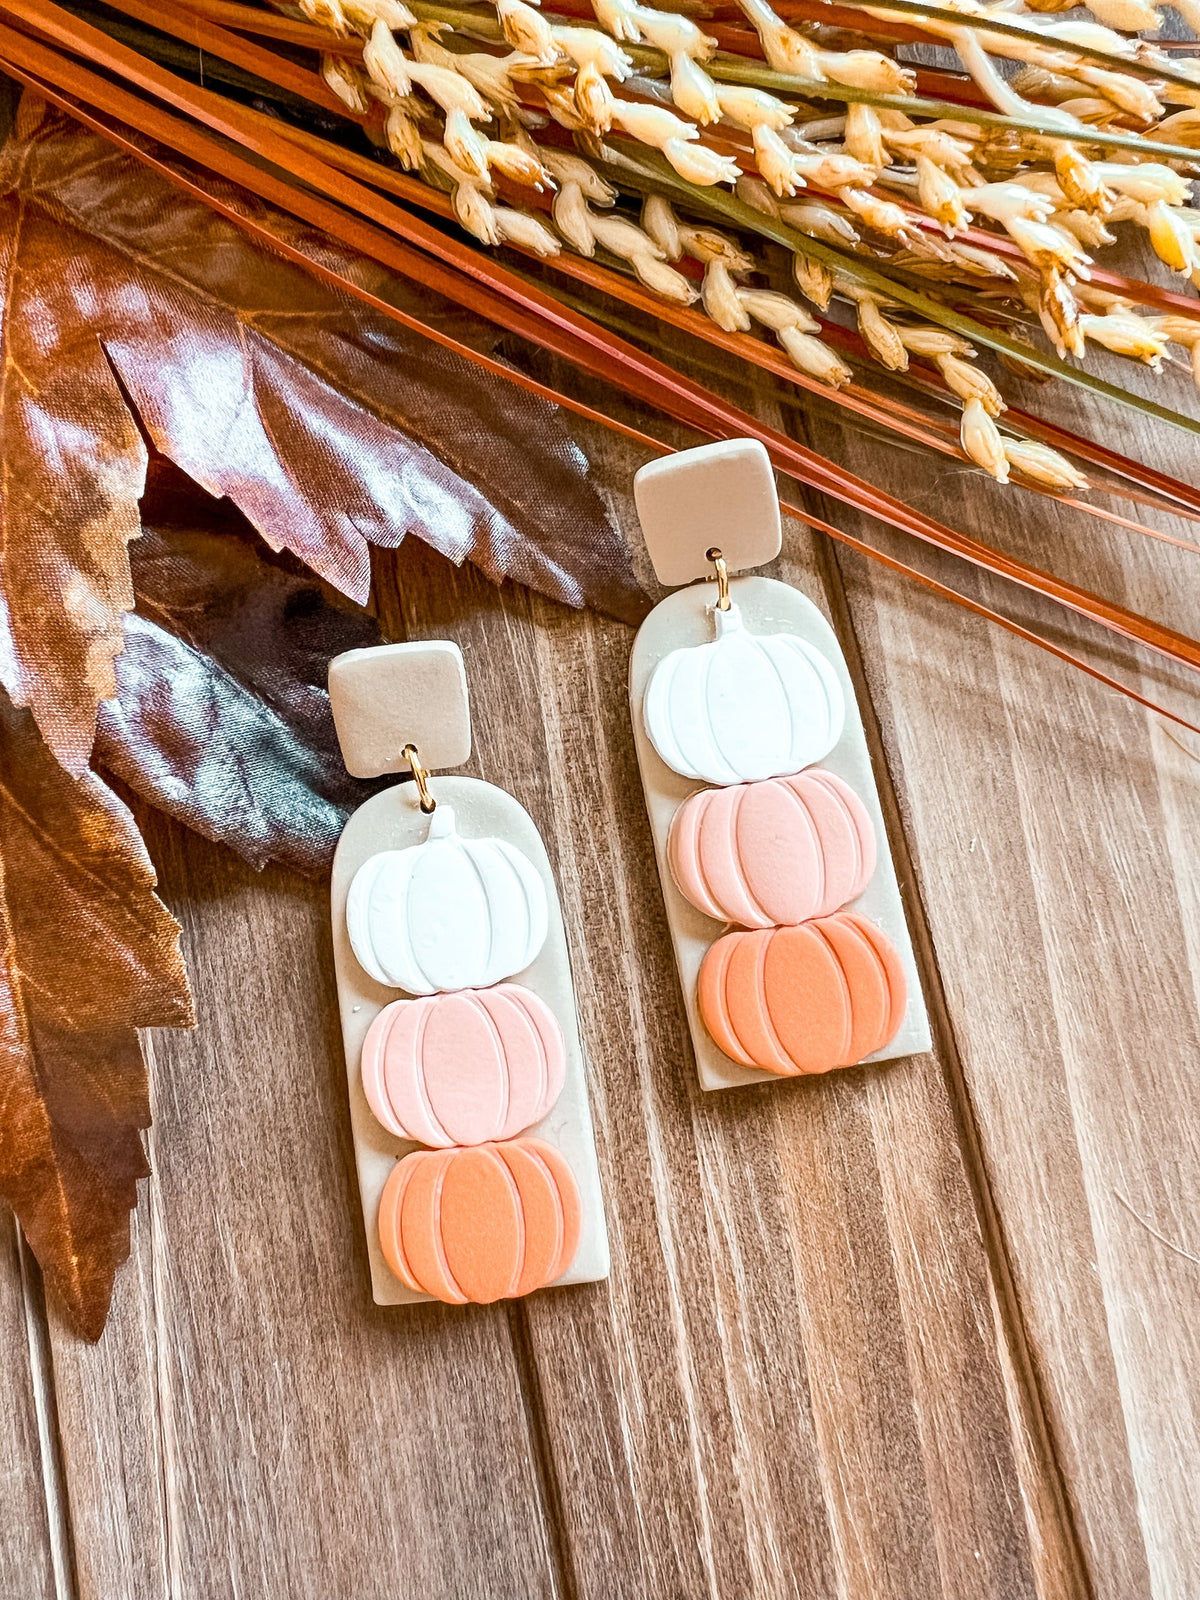 Polymer Clay Earrings with Three Pumpkins in an Ombre white, pale orange, and orange